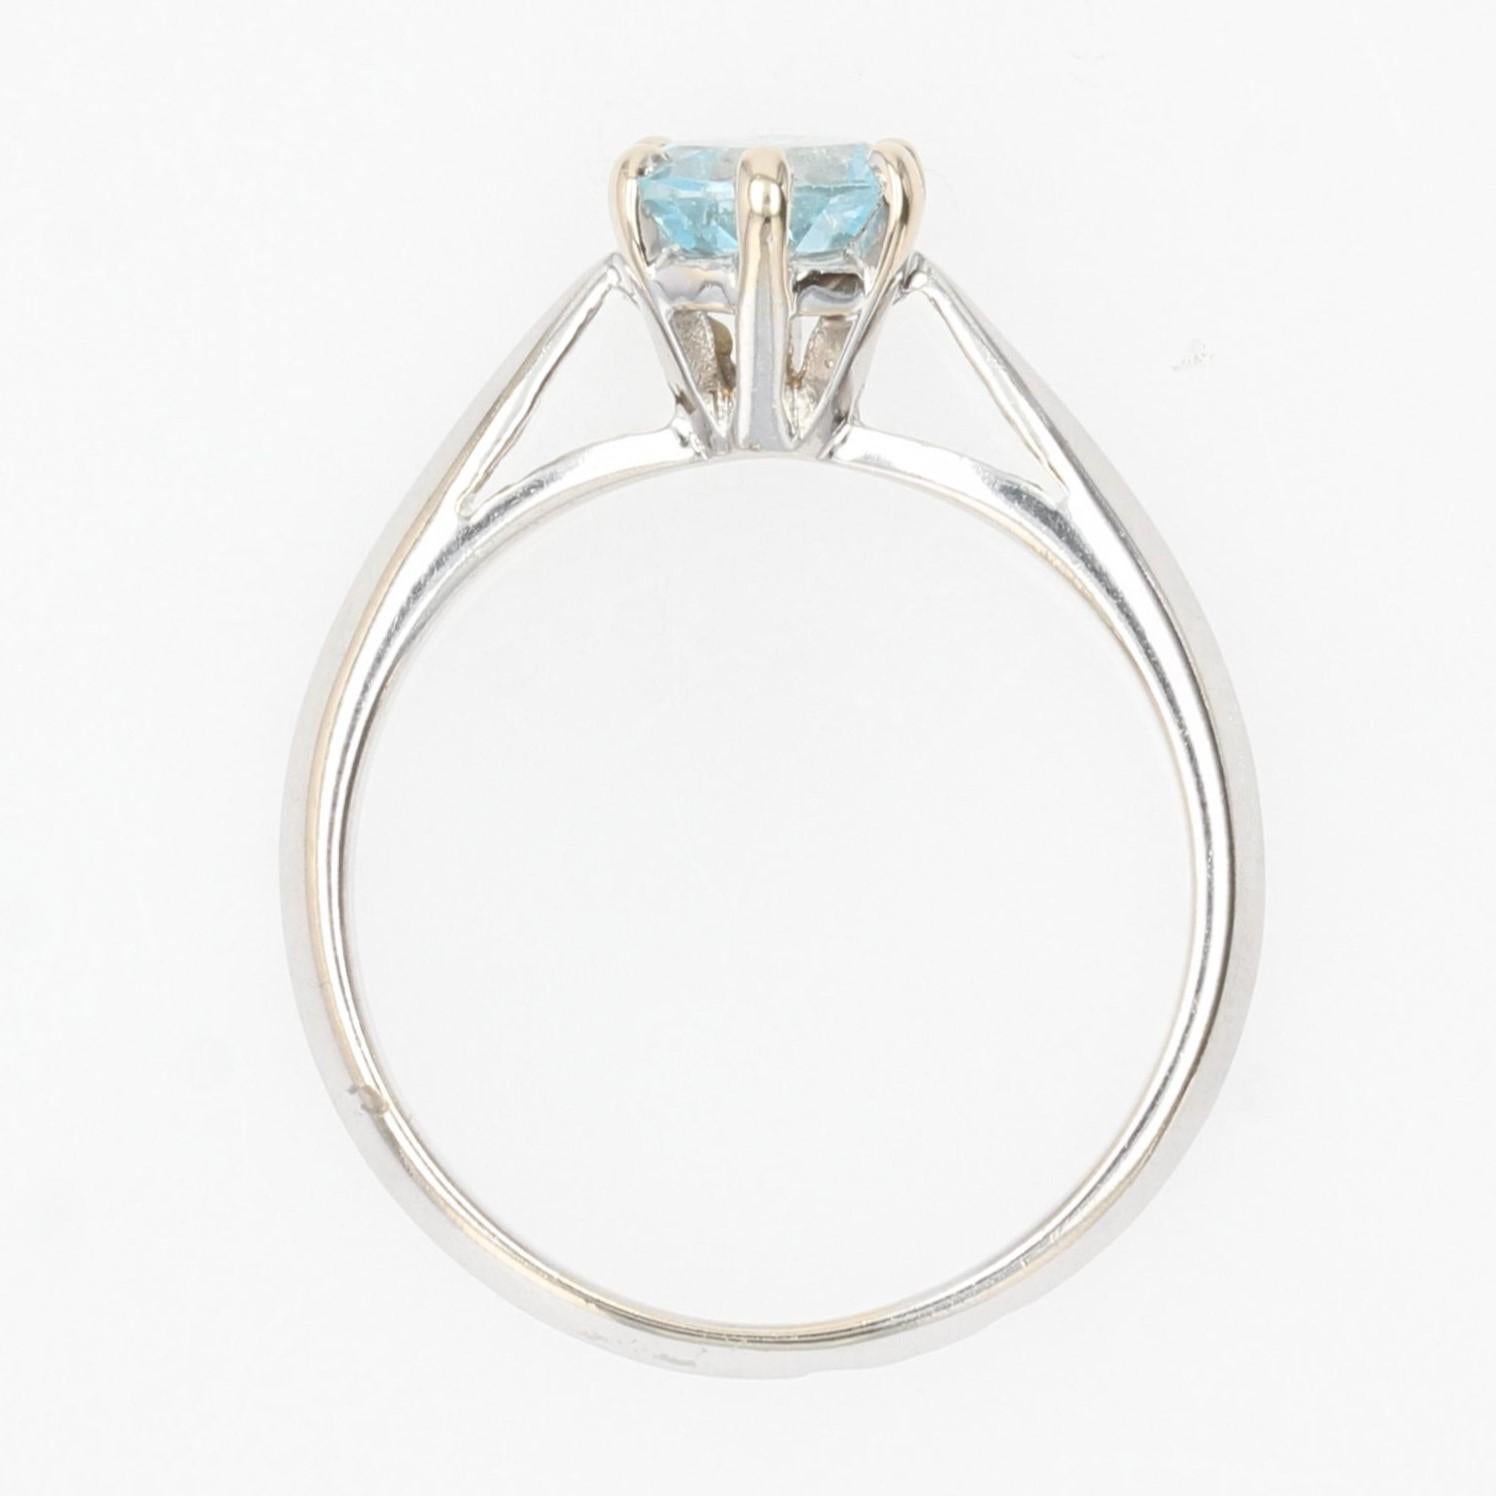 French 1970s Aquamarine 18 Karat White Gold Solitaire Ring For Sale 10